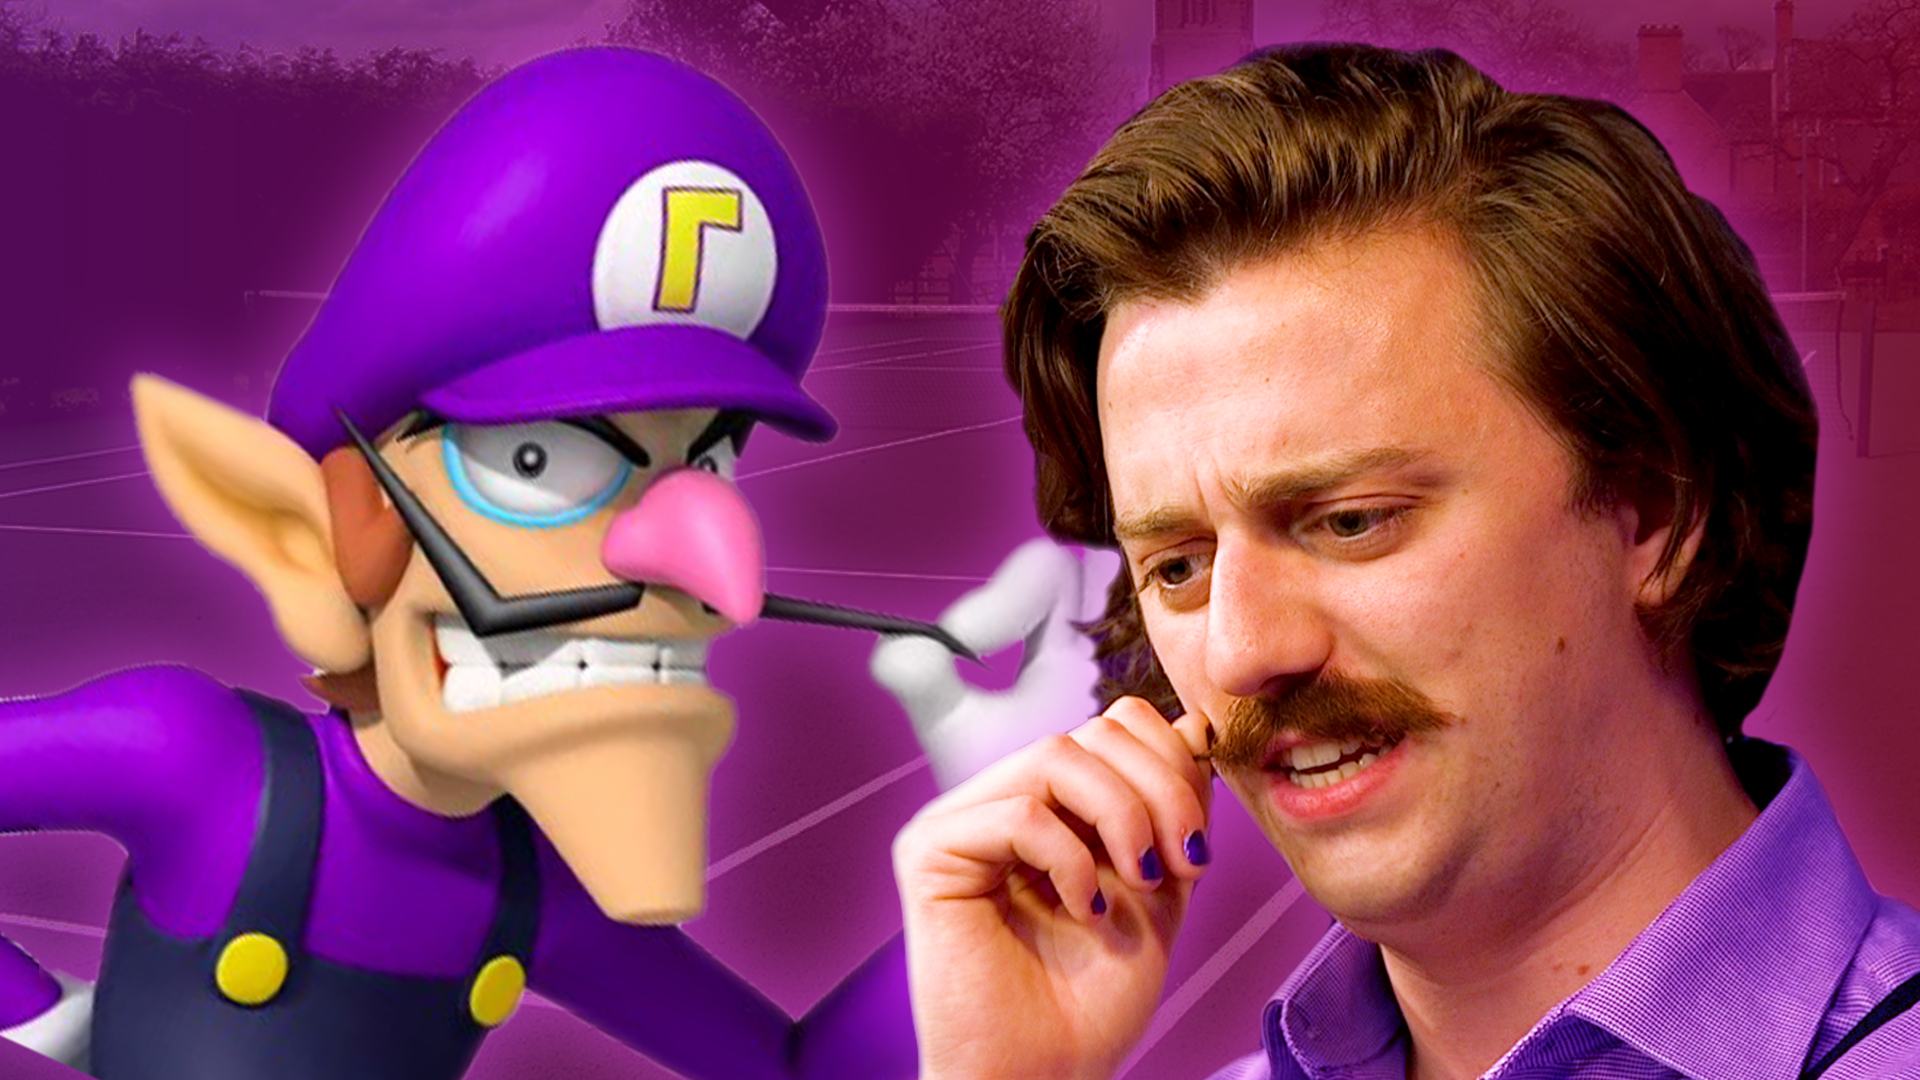 On the left, Waluigi twists his mustache menacingly. On the right, Brian David Gilbert twists his mustache confusedly.